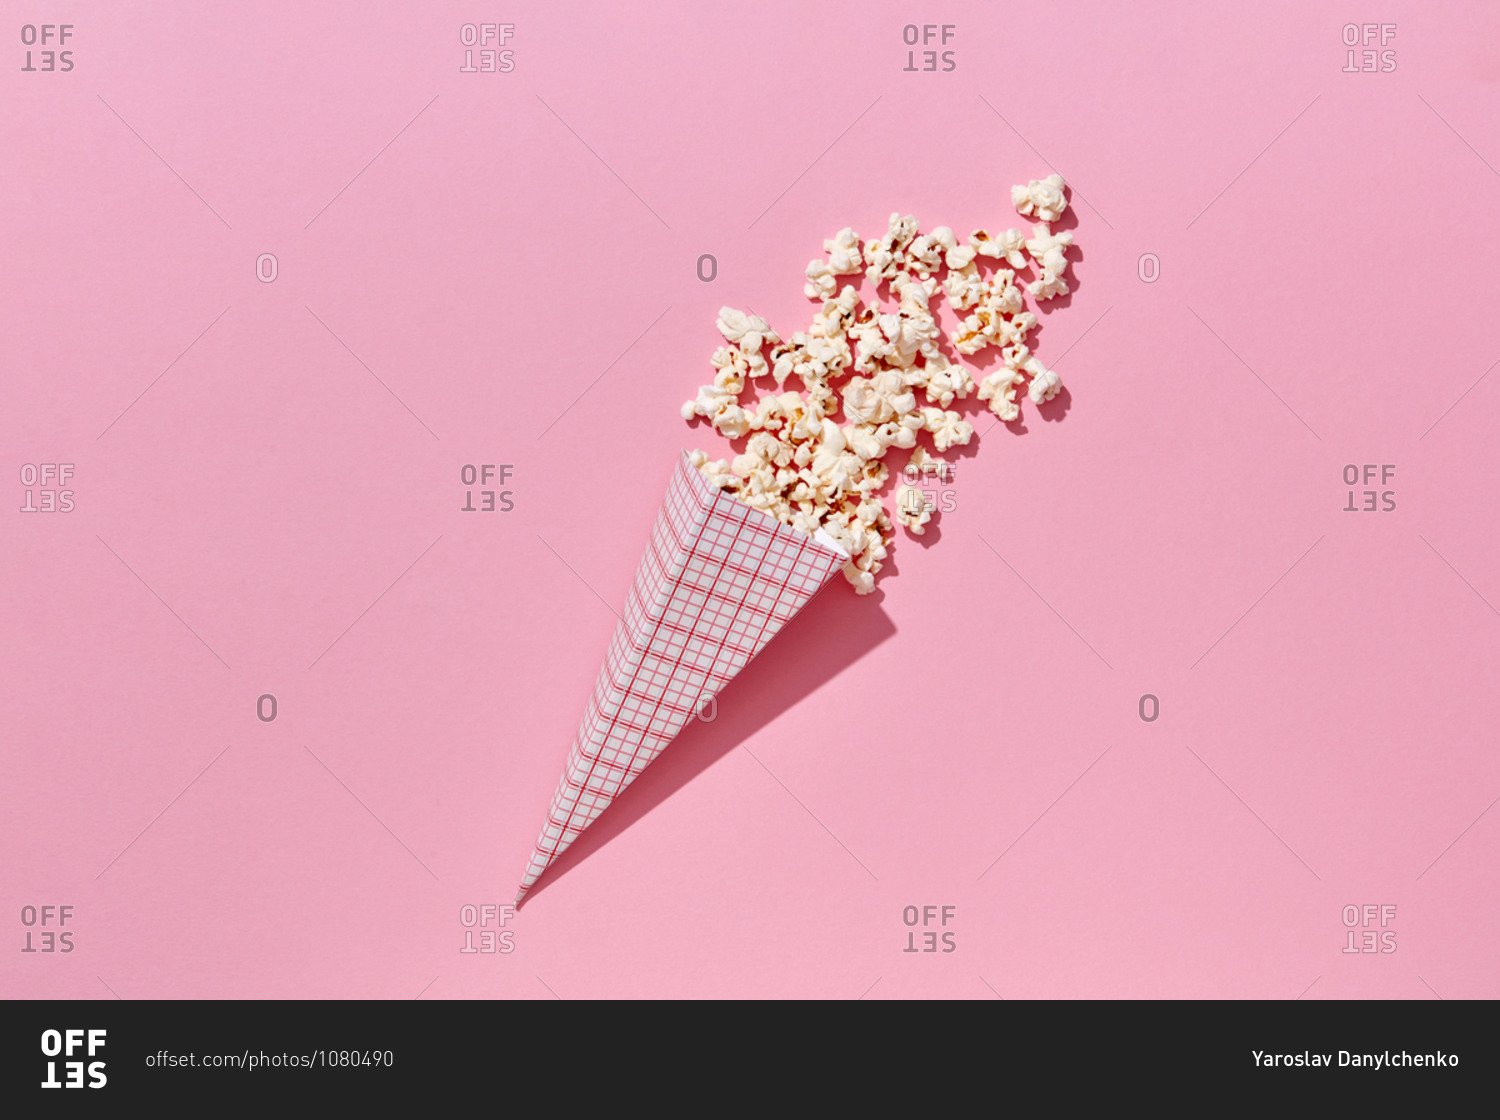 Tasty cooked classic popcorn in paper cone on pink background